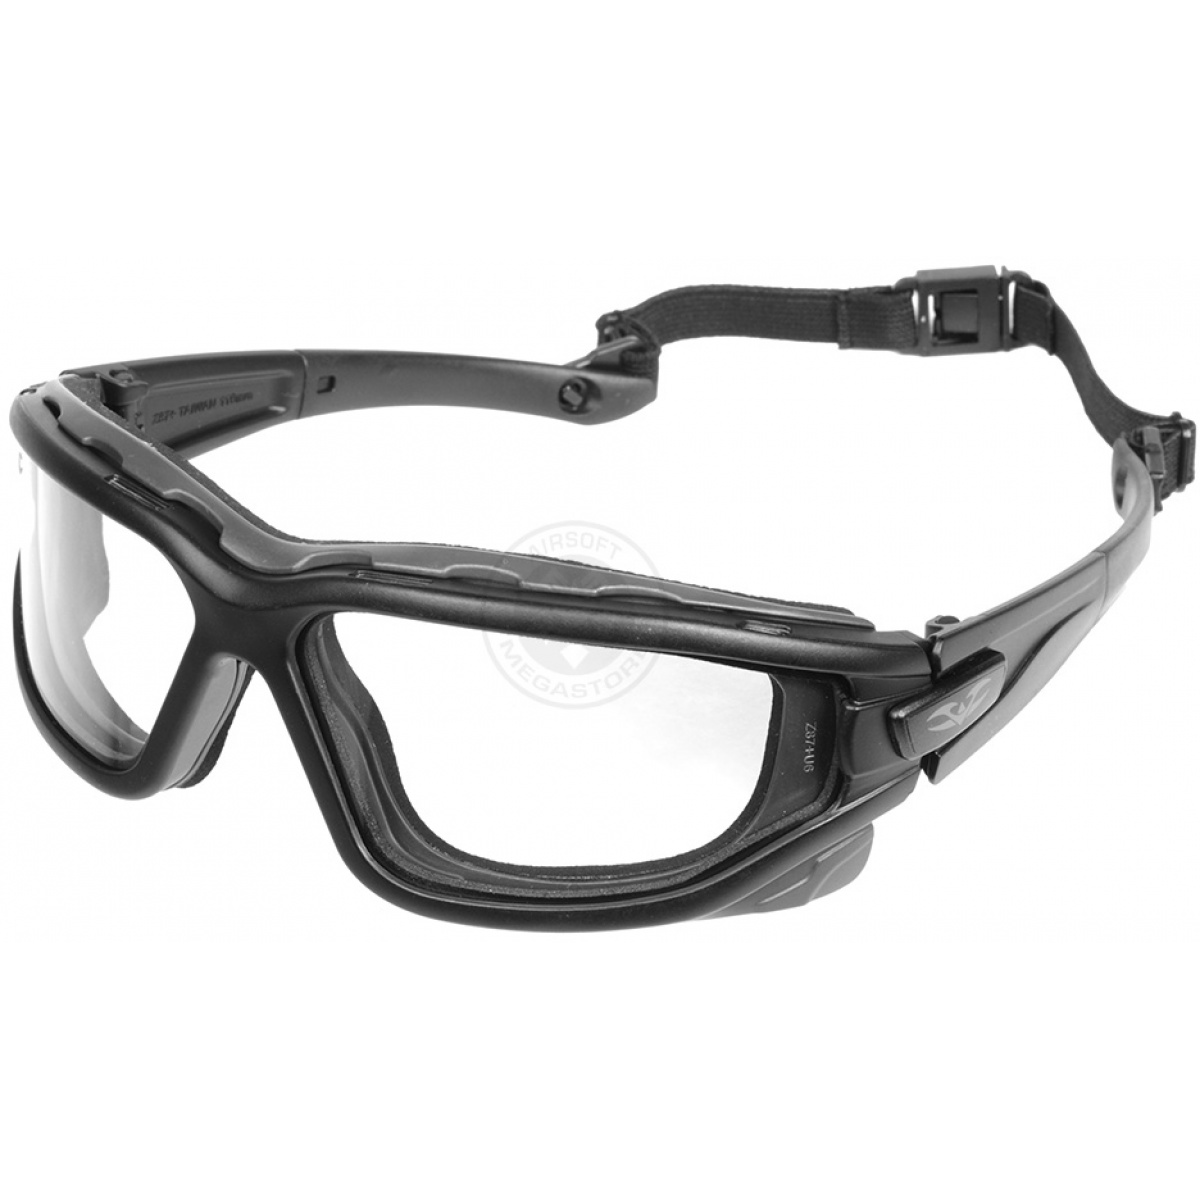 Dual Pane Clear Lens Airsoft Valken Zulu Tactical Goggles Free Shipping 844959047606 